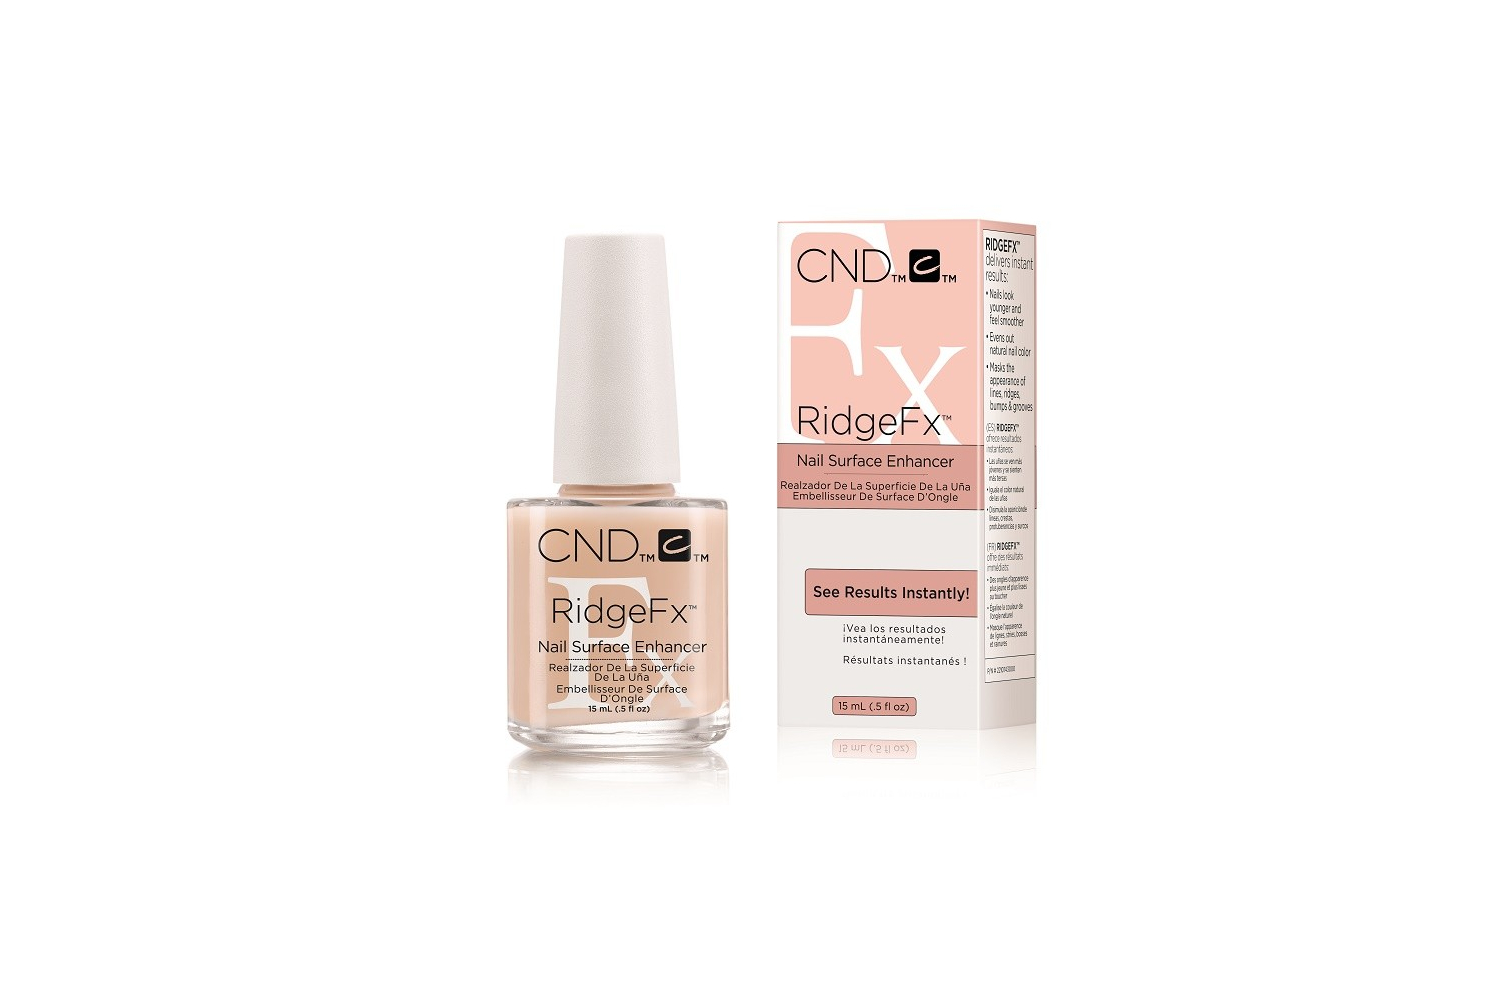 CND extends product range